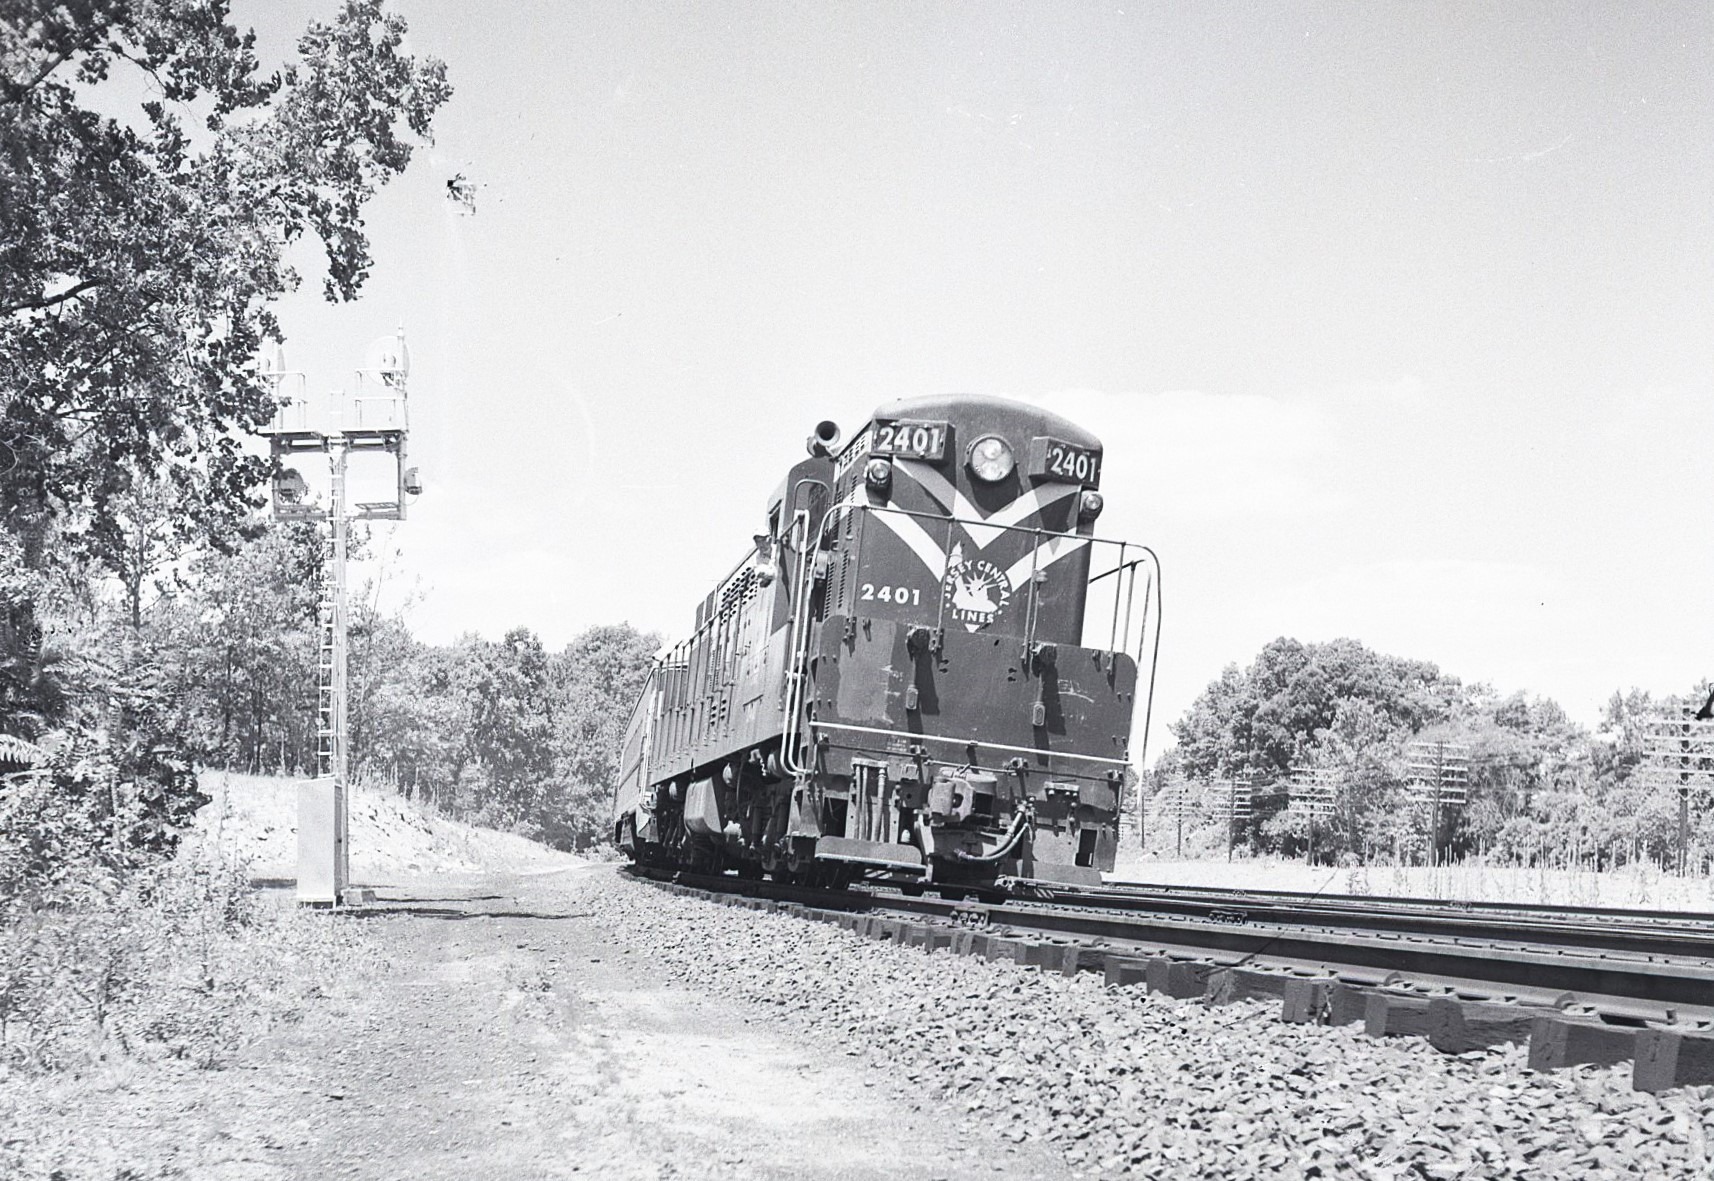 Central Railroad of New Jersey | Reading Company | Valley Forge, Pa. | H24-66 2401 | Boy Scout Jamboree Special | July 1957 | John Bowman, Jr.